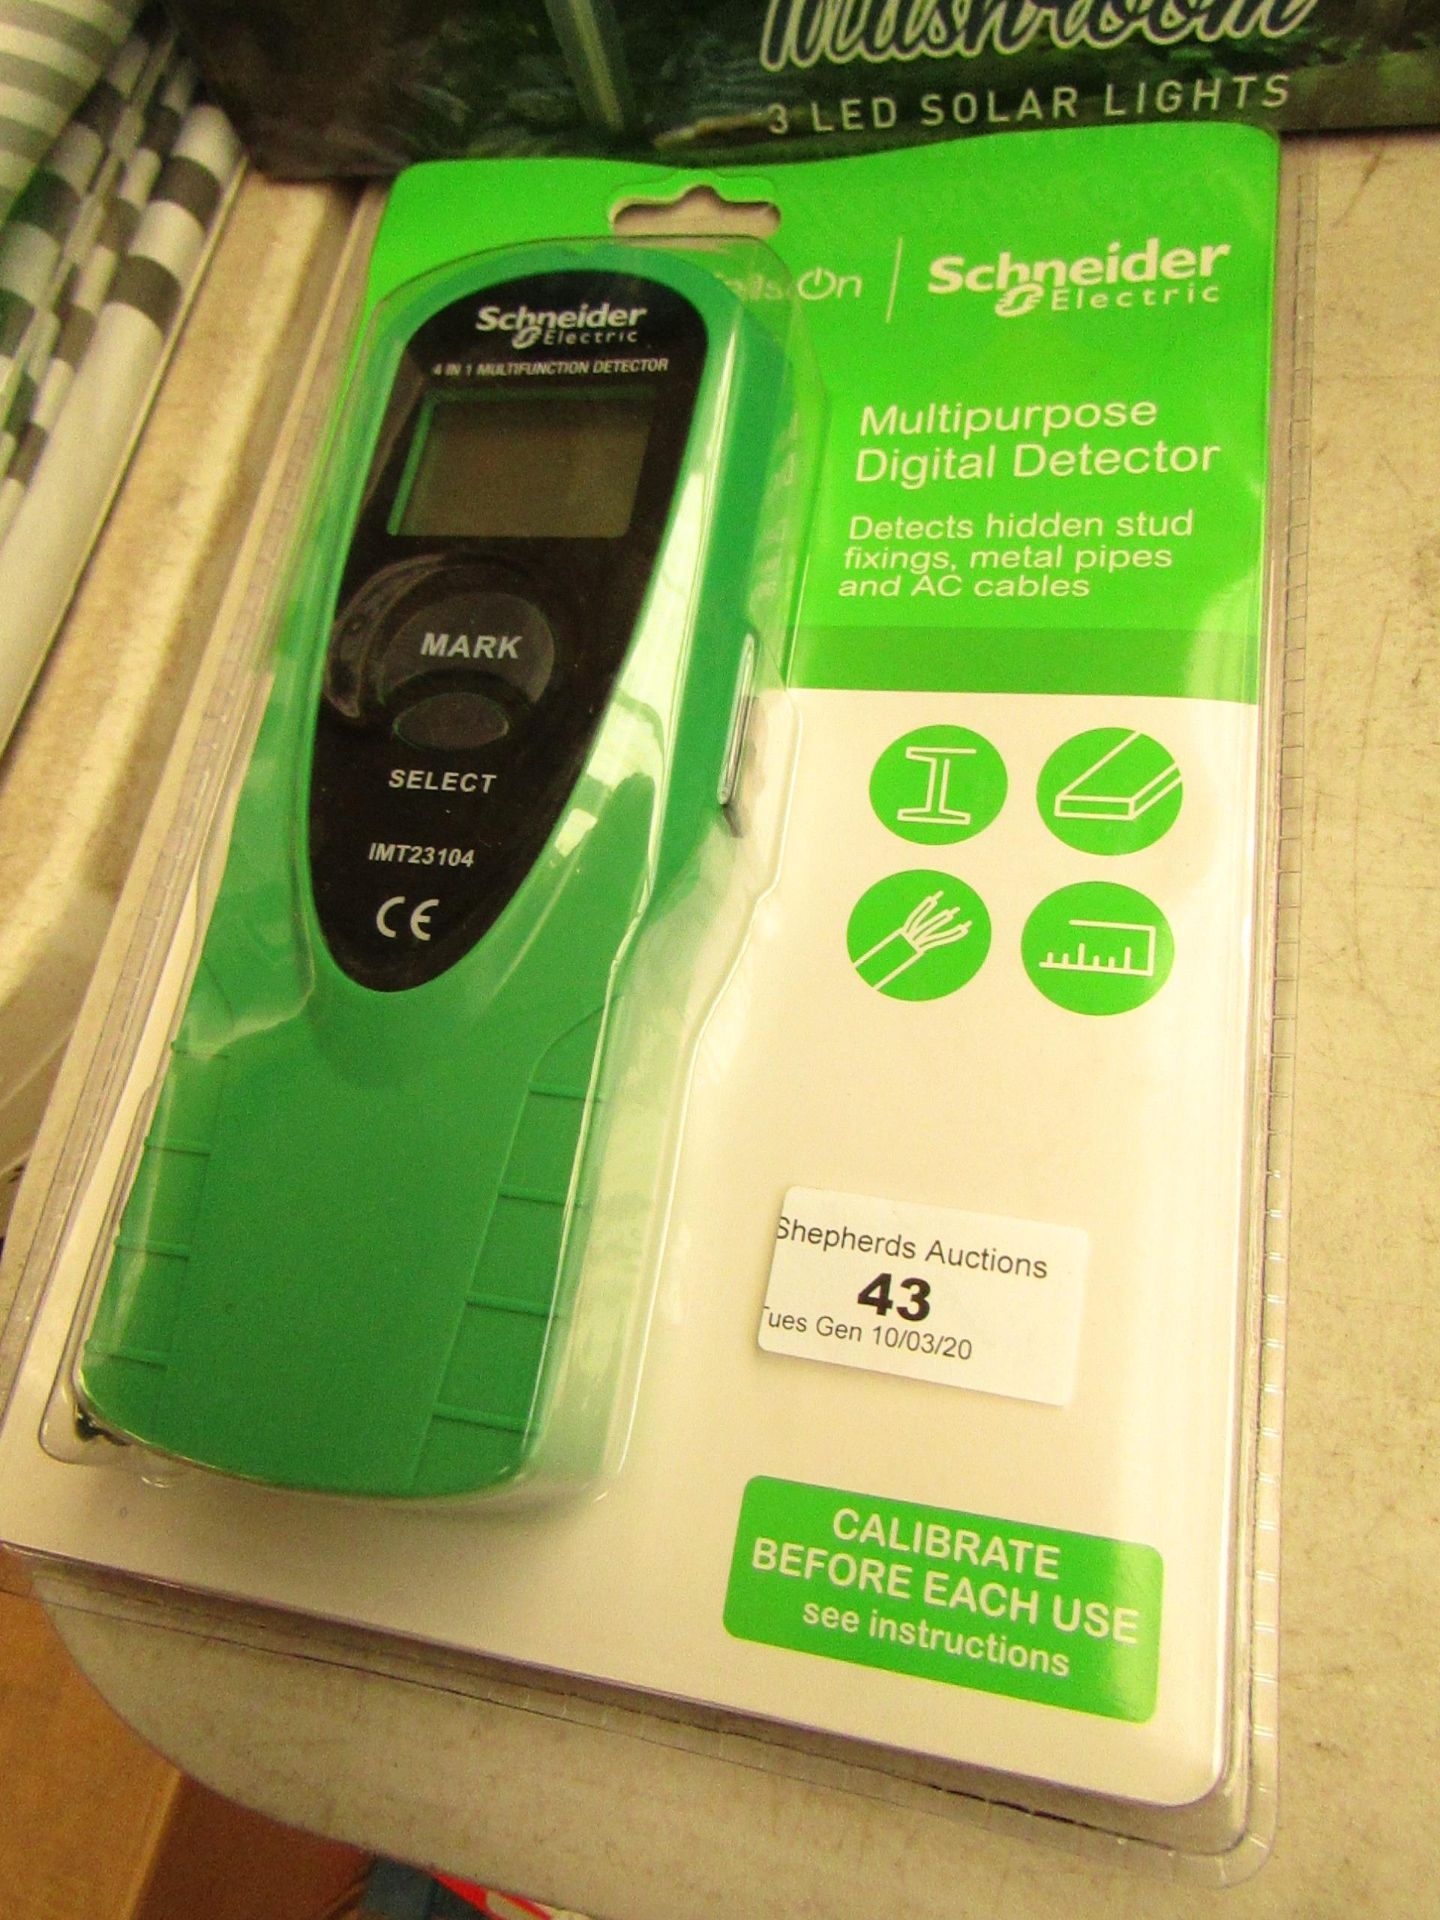 Schneider multi-purpose digital detector, new and packaged.